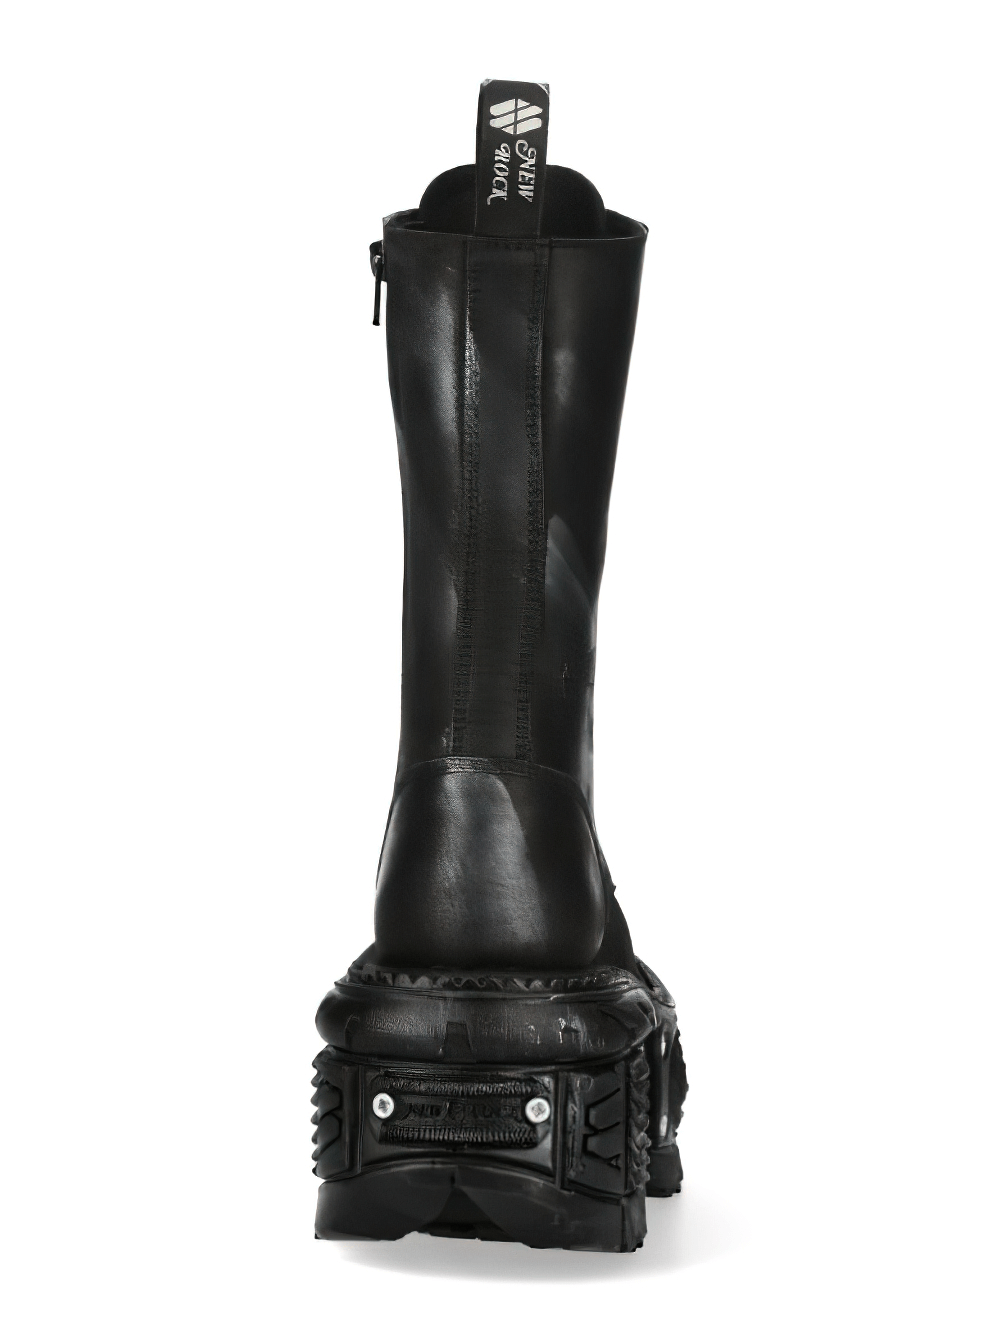 NEW ROCK Rugged Leather Biker Combat Boots with Zipper